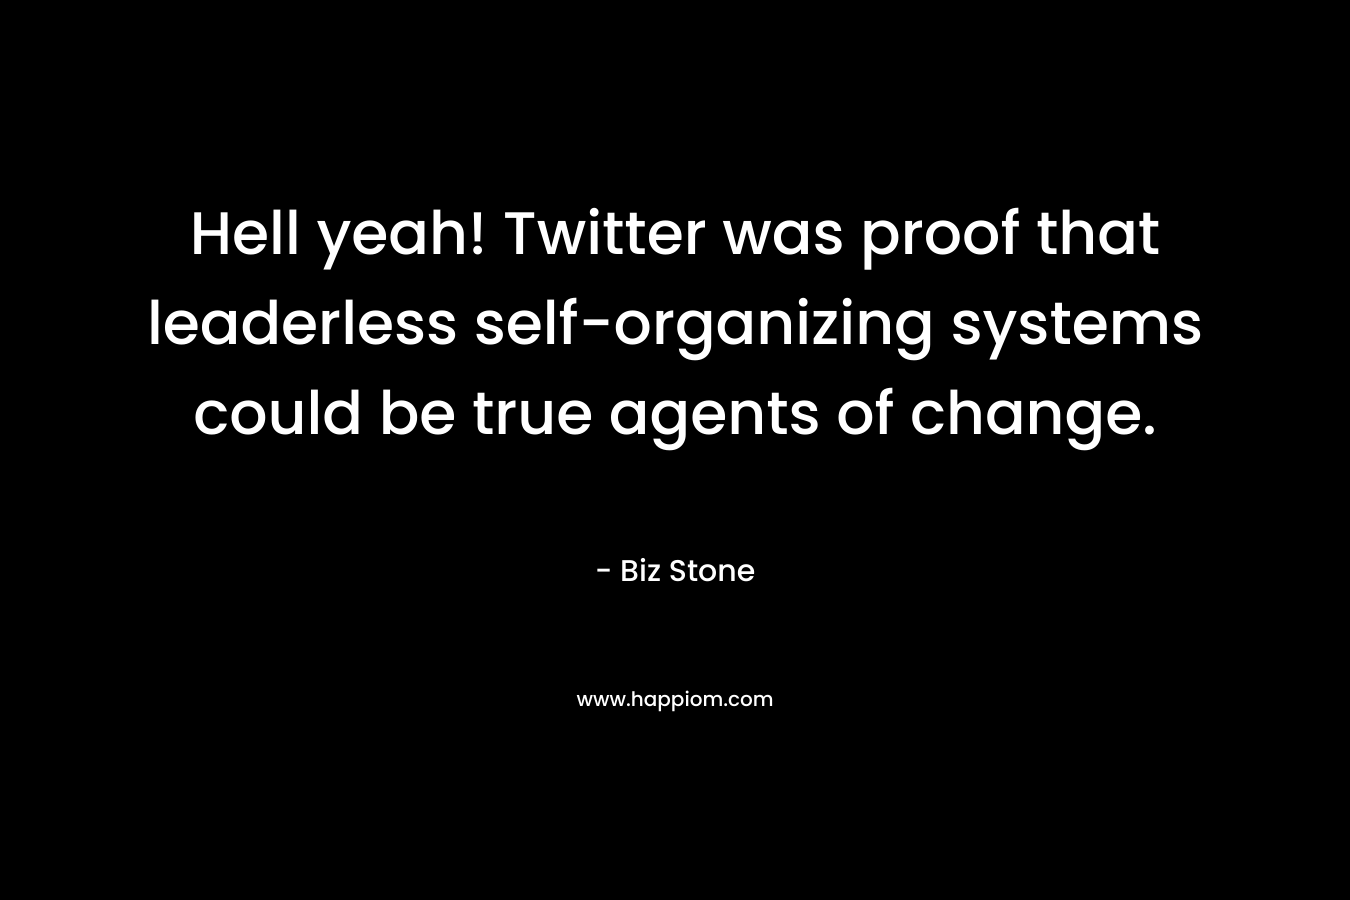 Hell yeah! Twitter was proof that leaderless self-organizing systems could be true agents of change. – Biz Stone